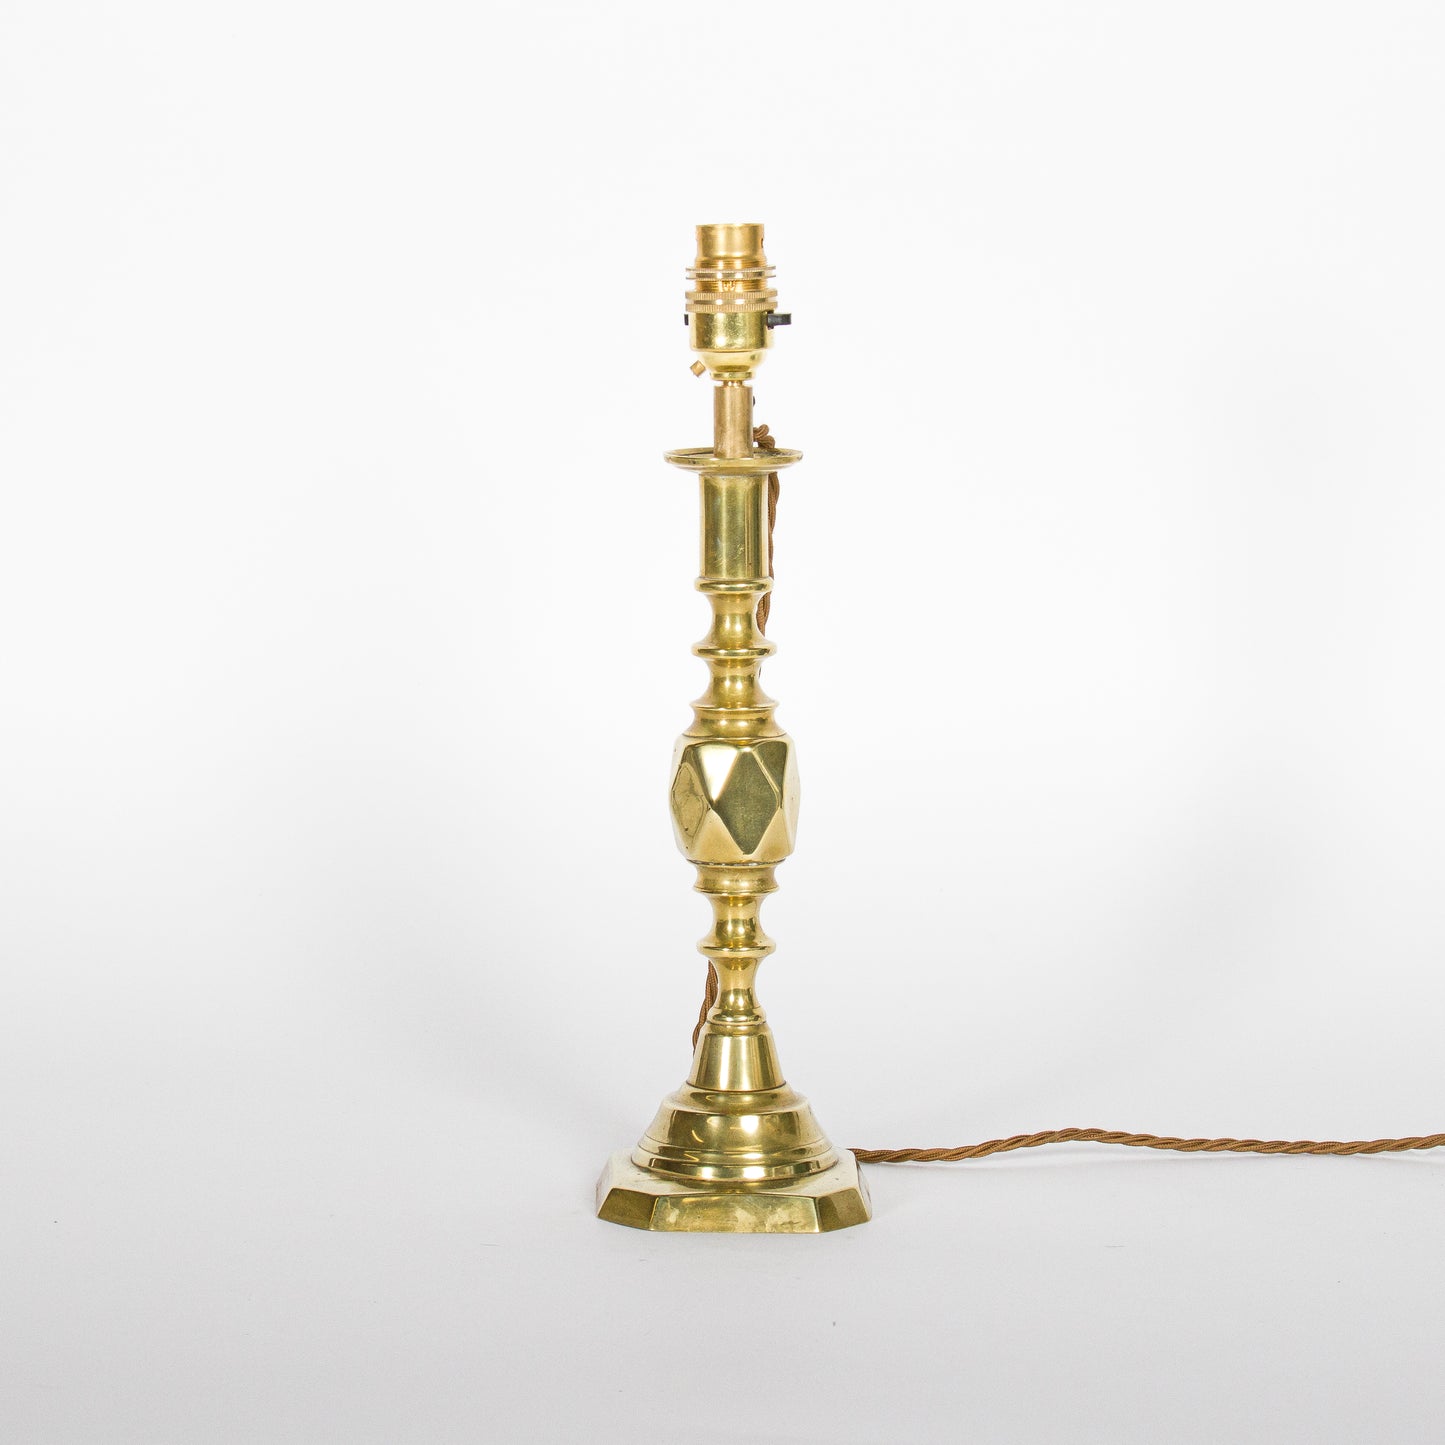 A pair of brass candlesticks converted to lamps - ’The Diamond Princess’